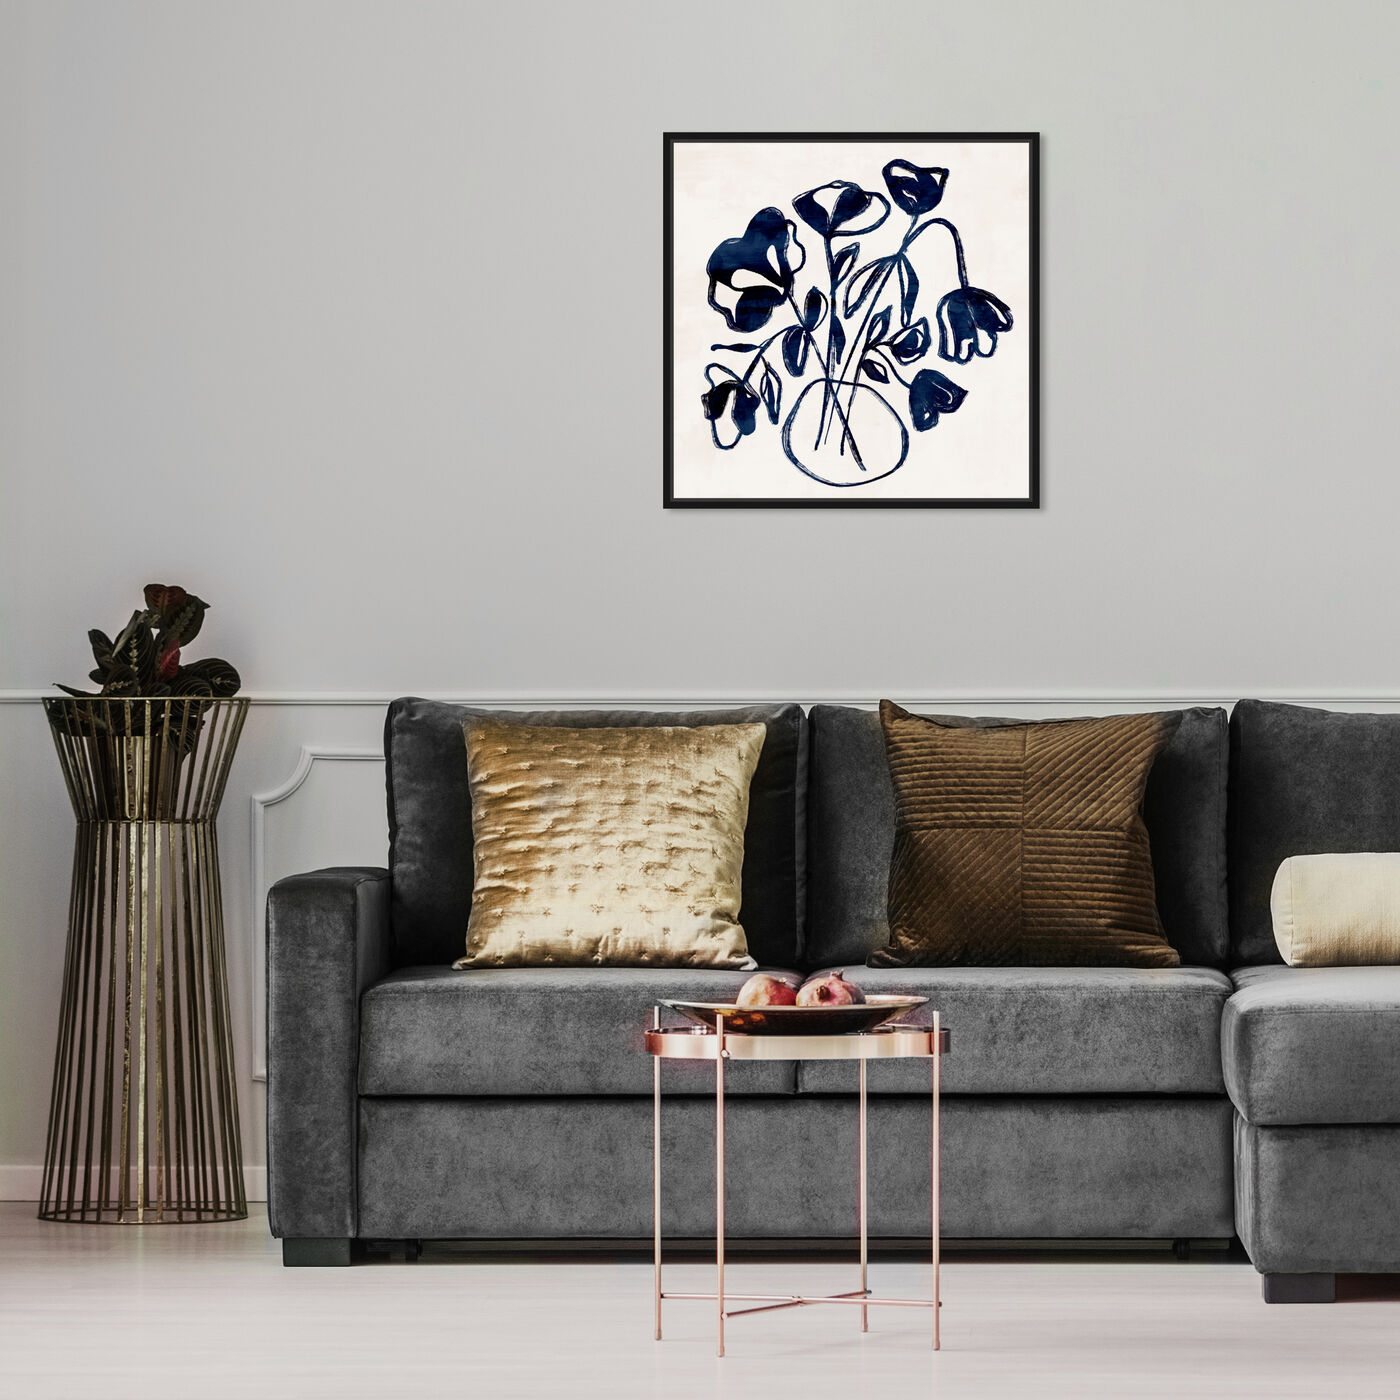 Hanging view of Floral Vase featuring floral and botanical and florals art.